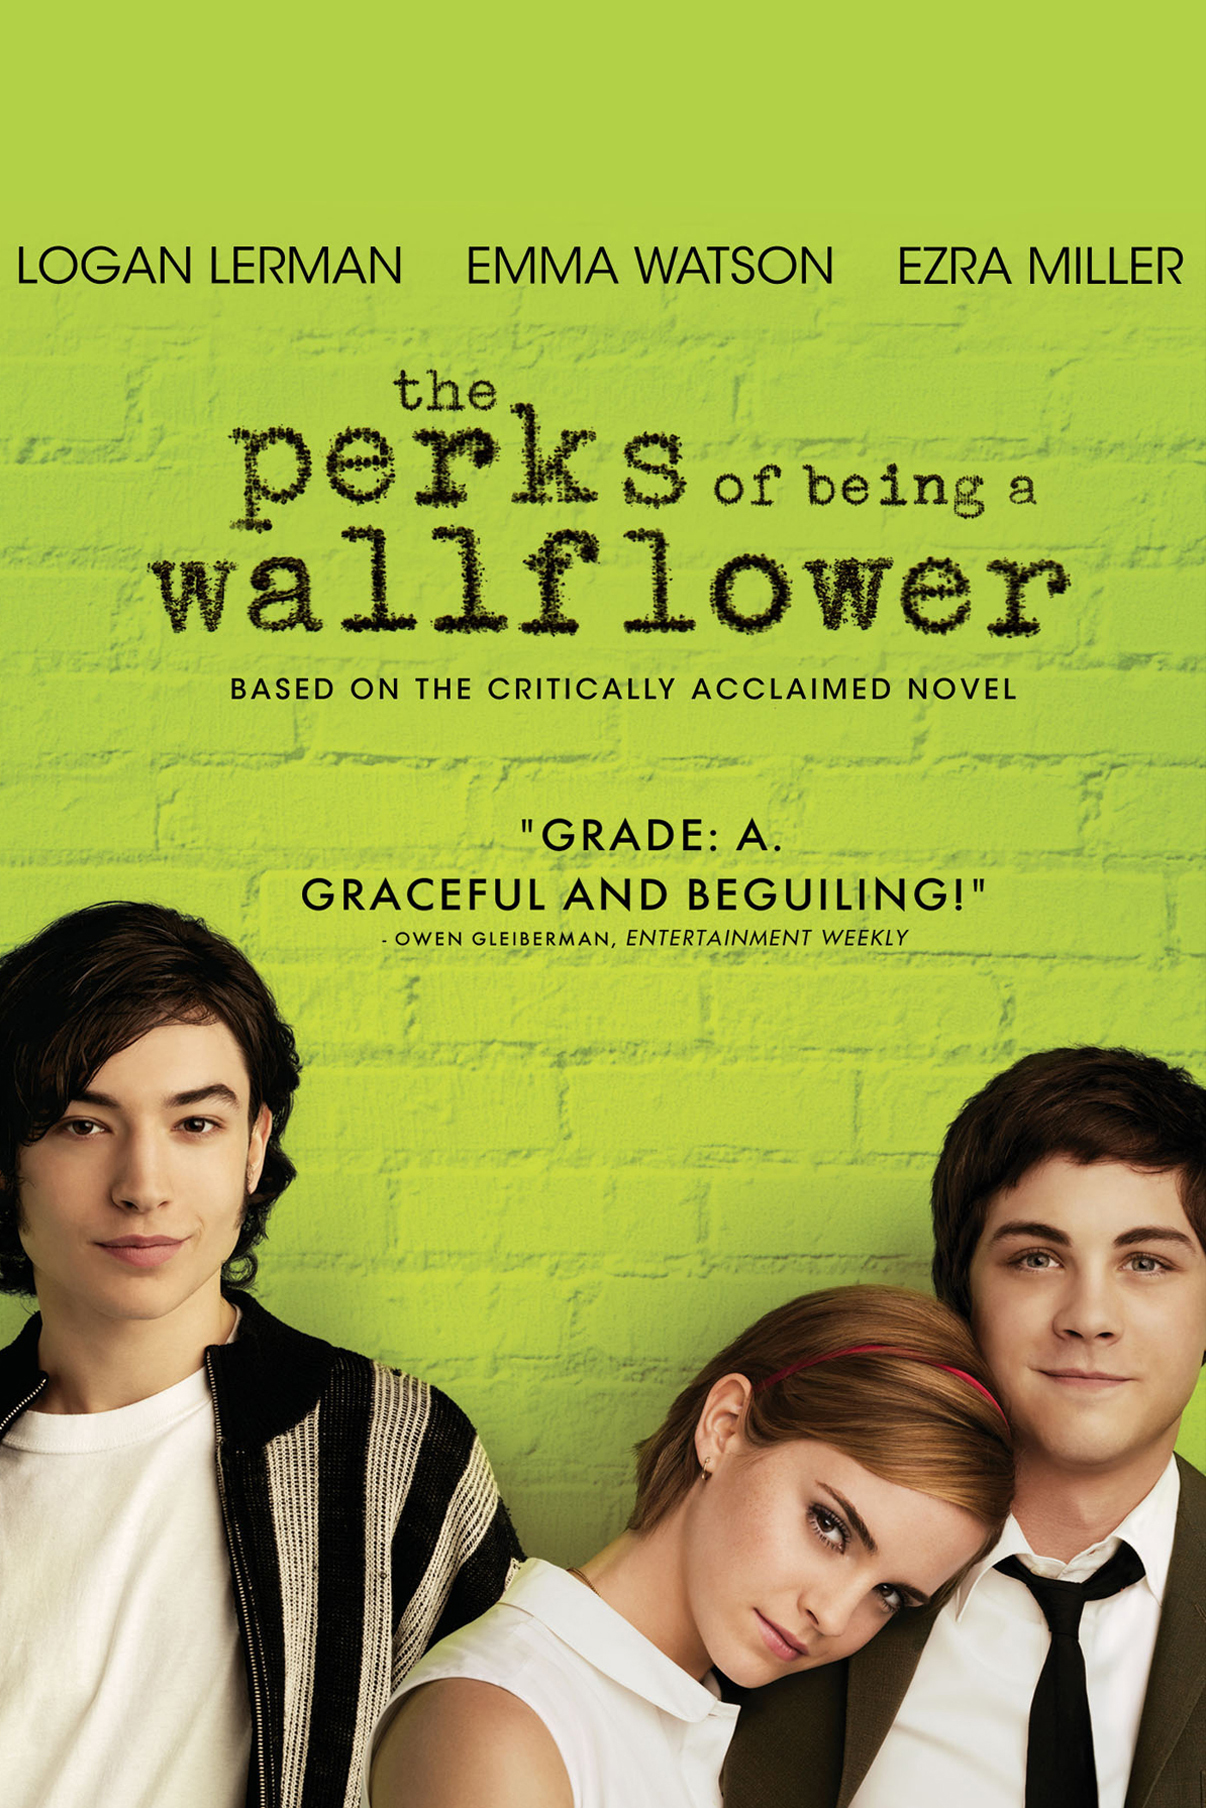 where can i watch perks of being a wallflower